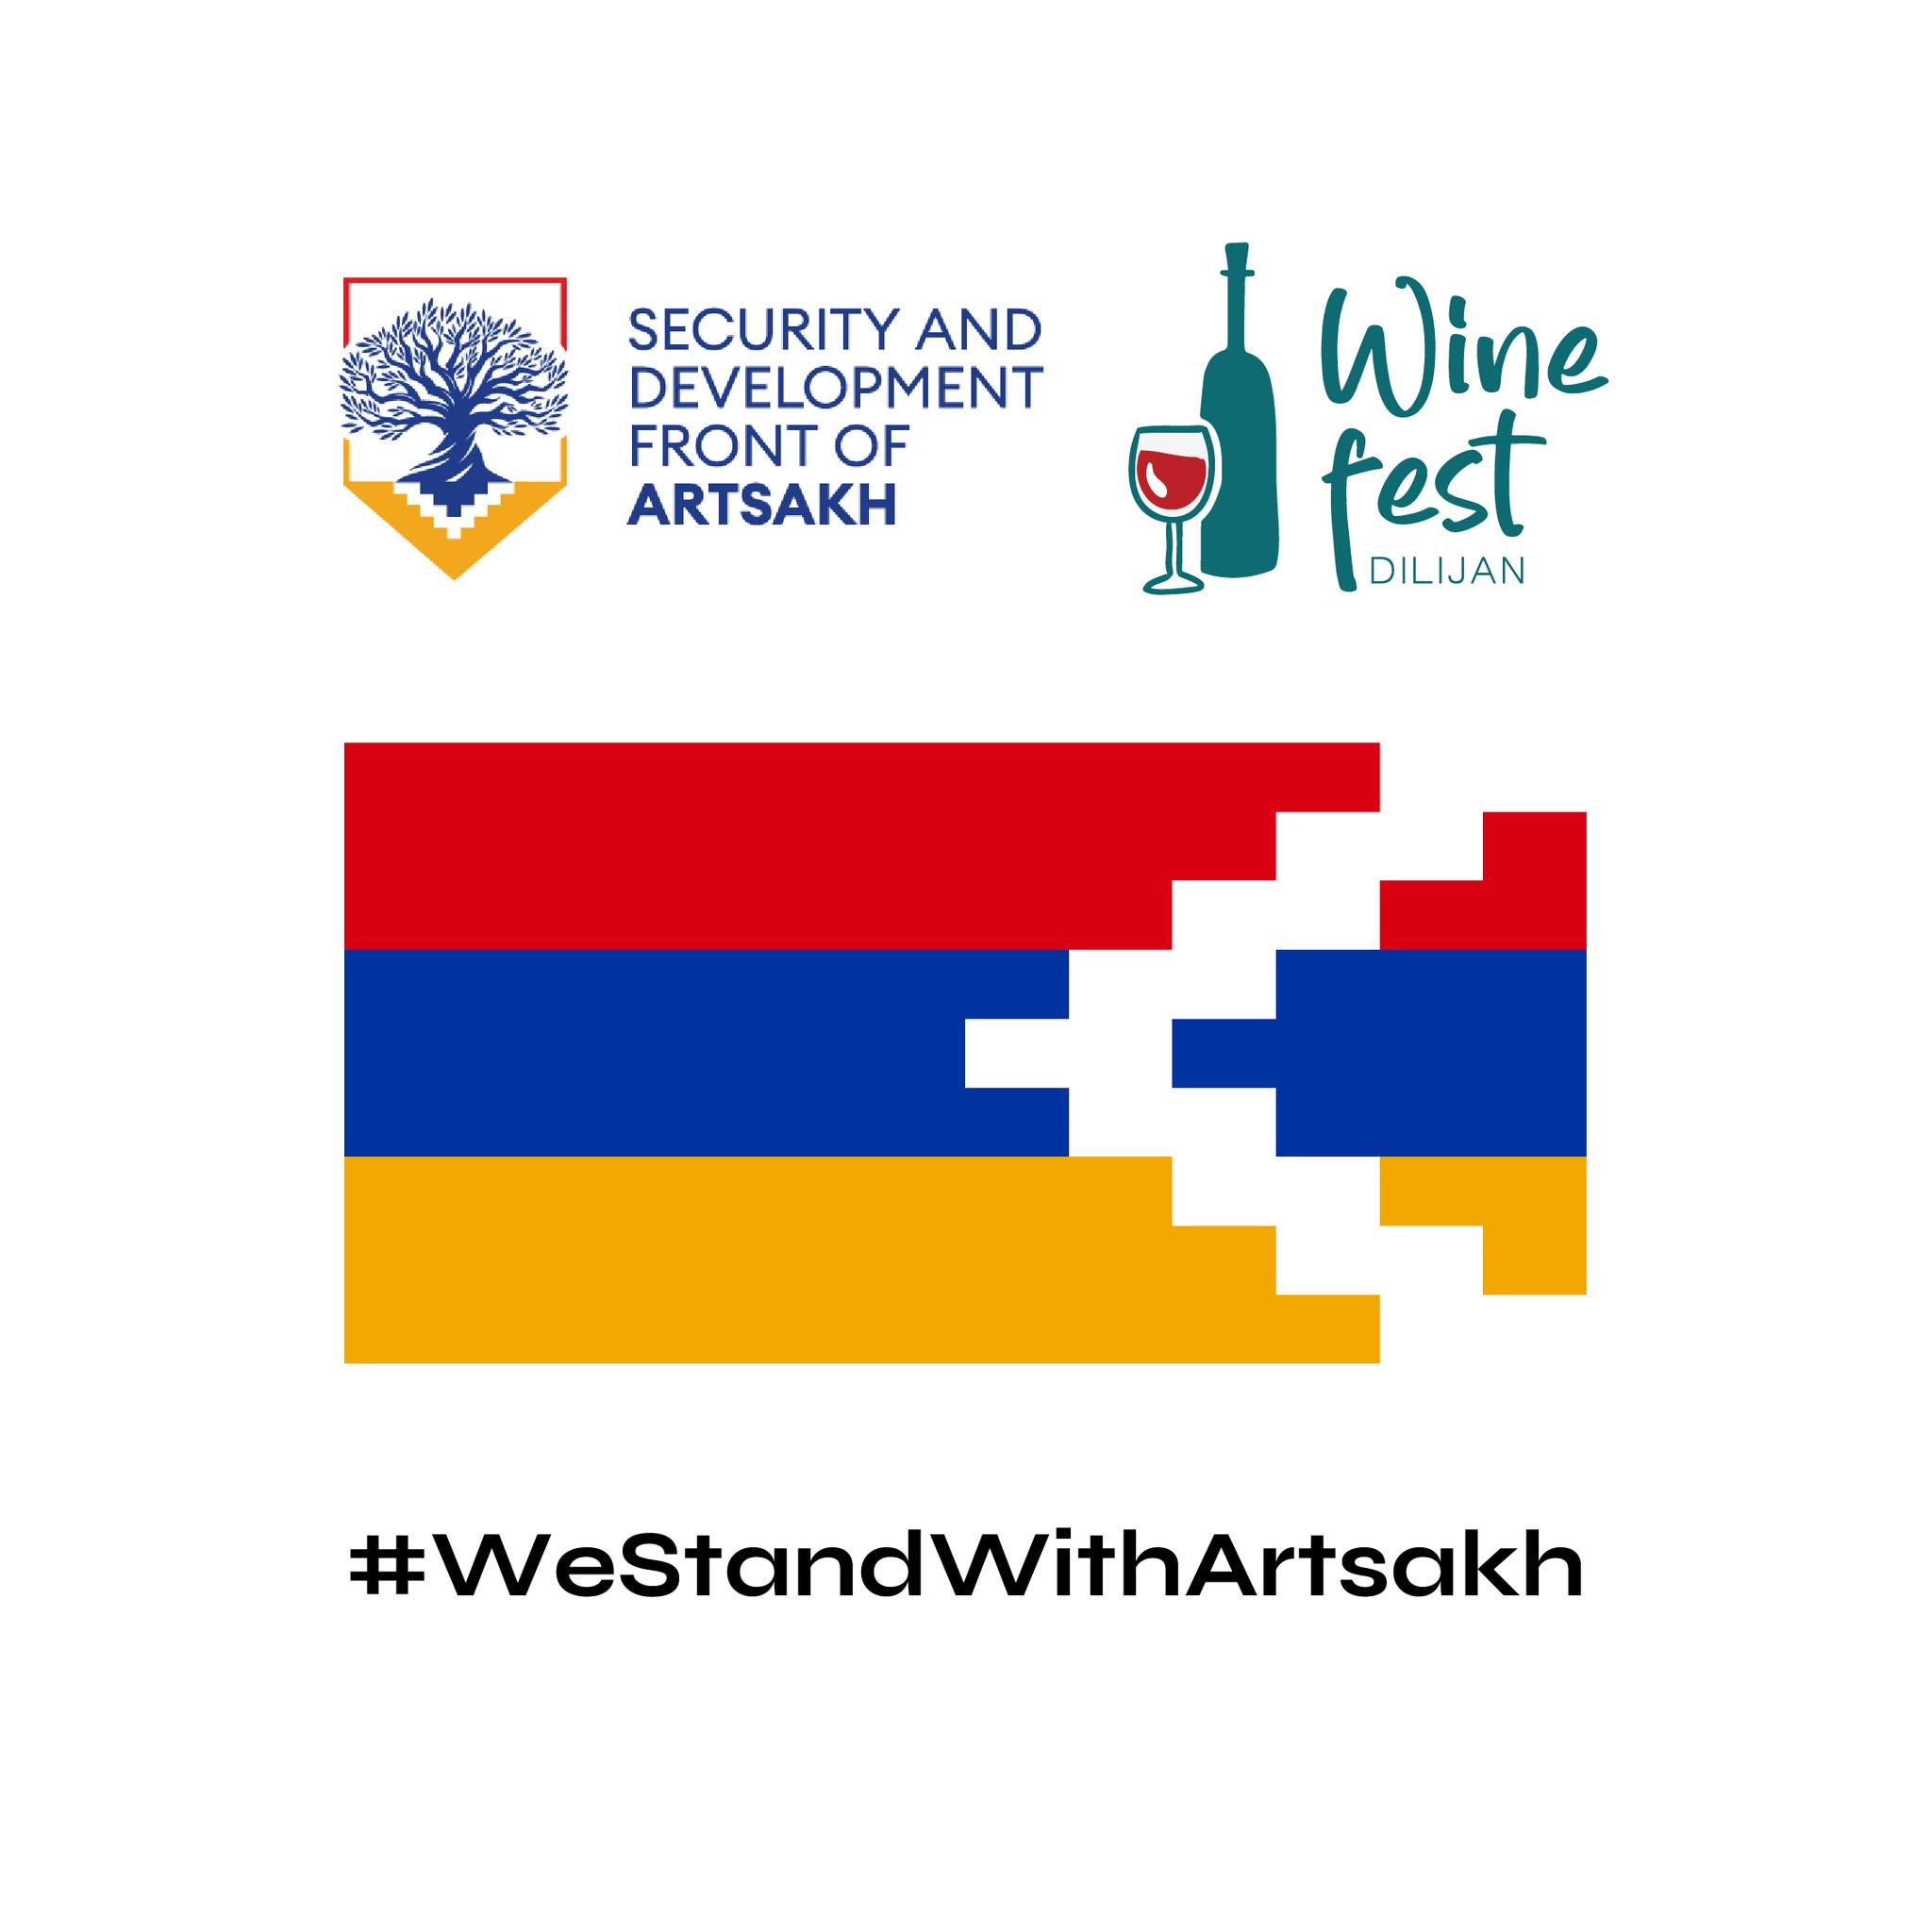 All proceeds of Dilijan Wine Fest to be directed to the aid of Artsakh